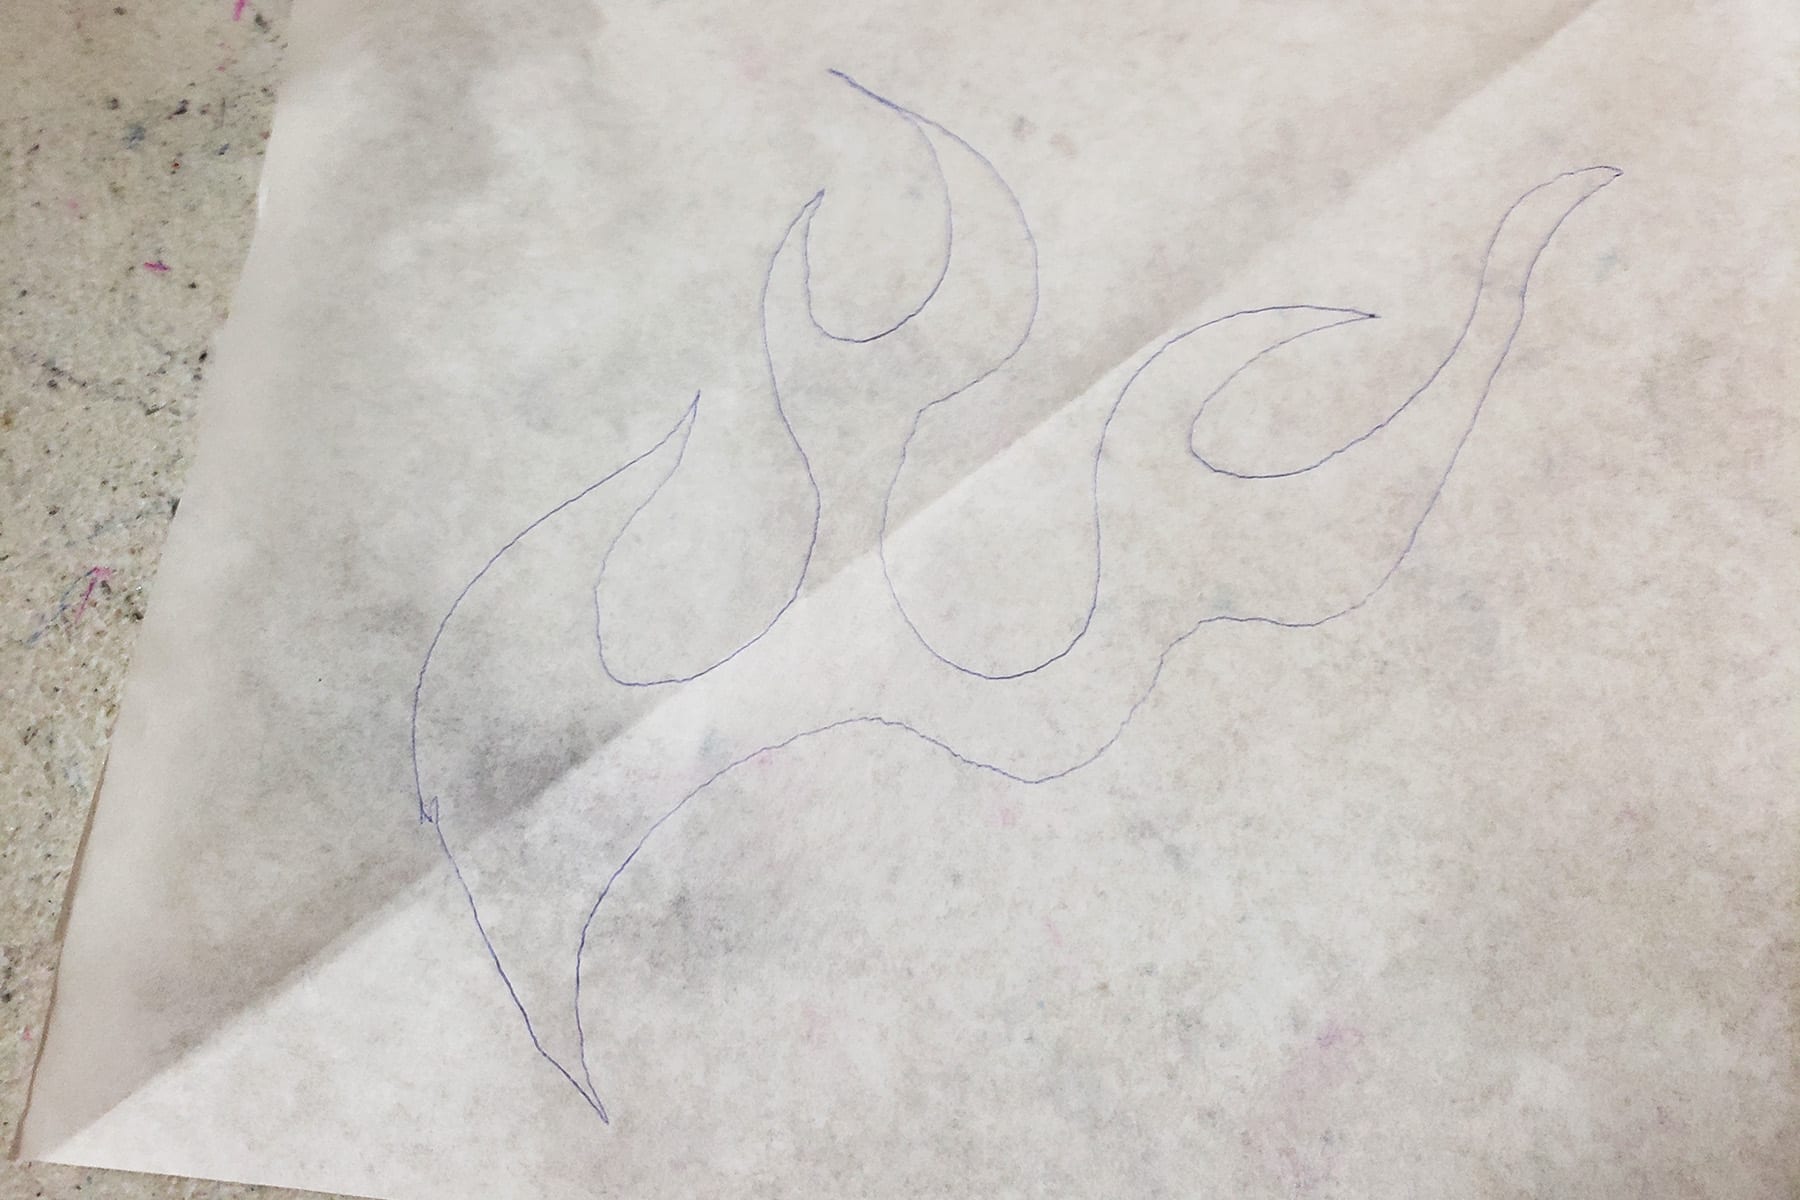 A piece of medical exam table paper with hot rod flames drawn on it in pen. This is the applique pattern.